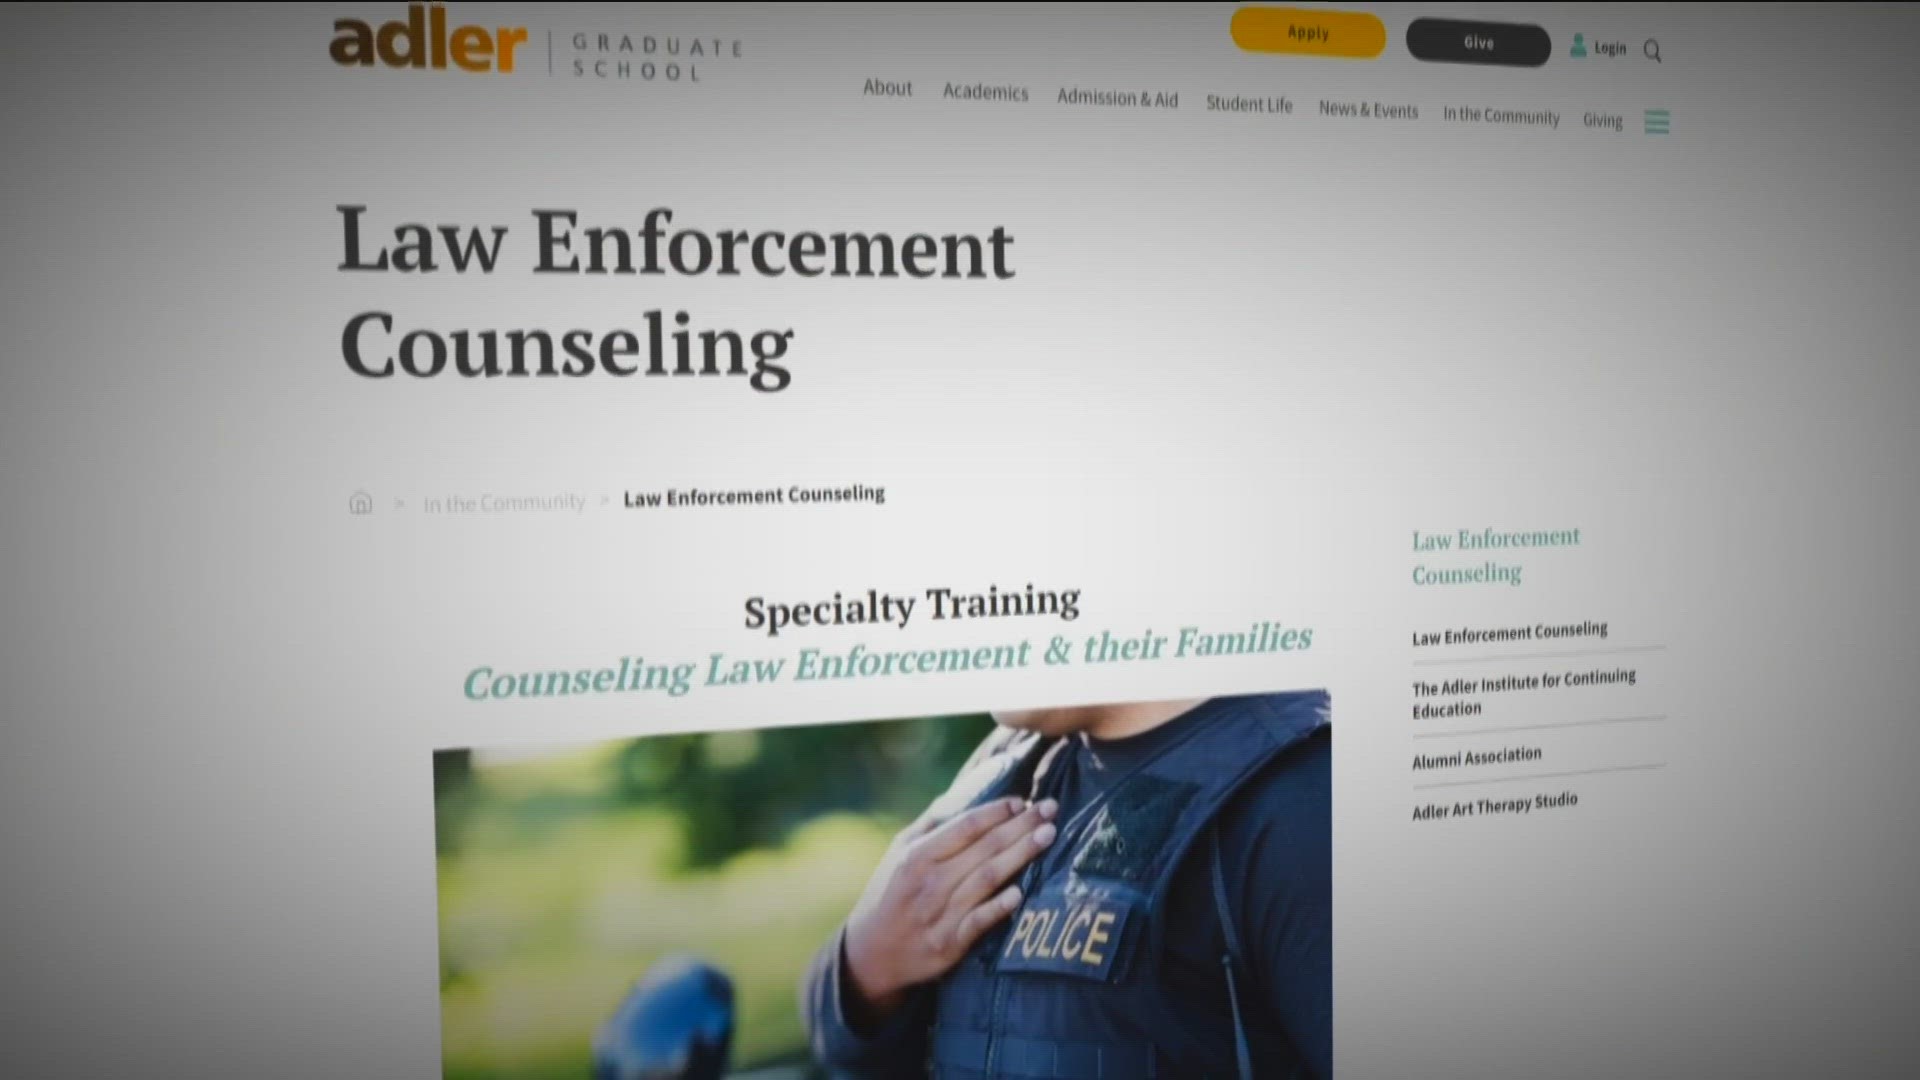 A grant for low-cost, specialized training for professionals who counsel law enforcement and their families was approved by the legislature last year.